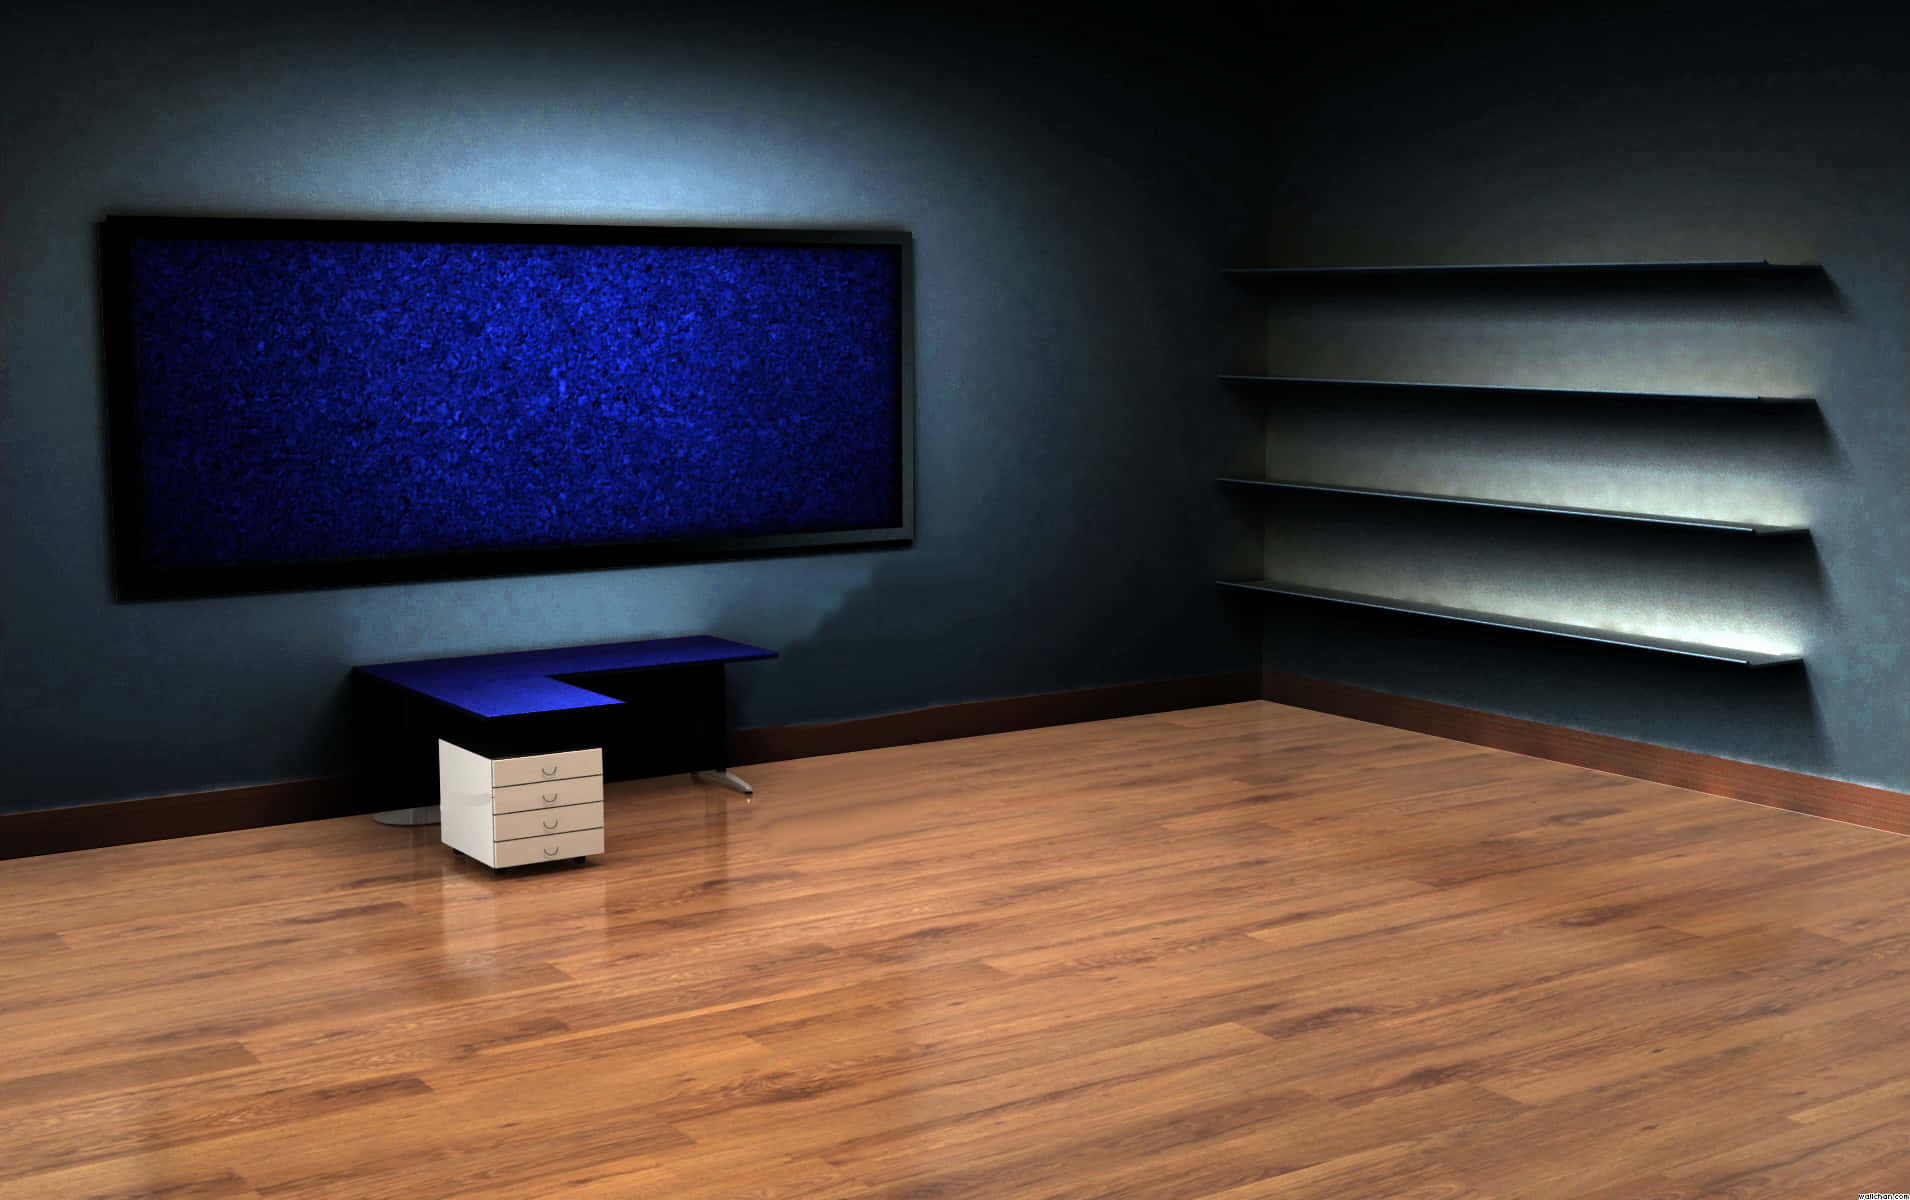 Modern Office Corner Featuring Blue Wall and White Shelves in 1440p Resolution